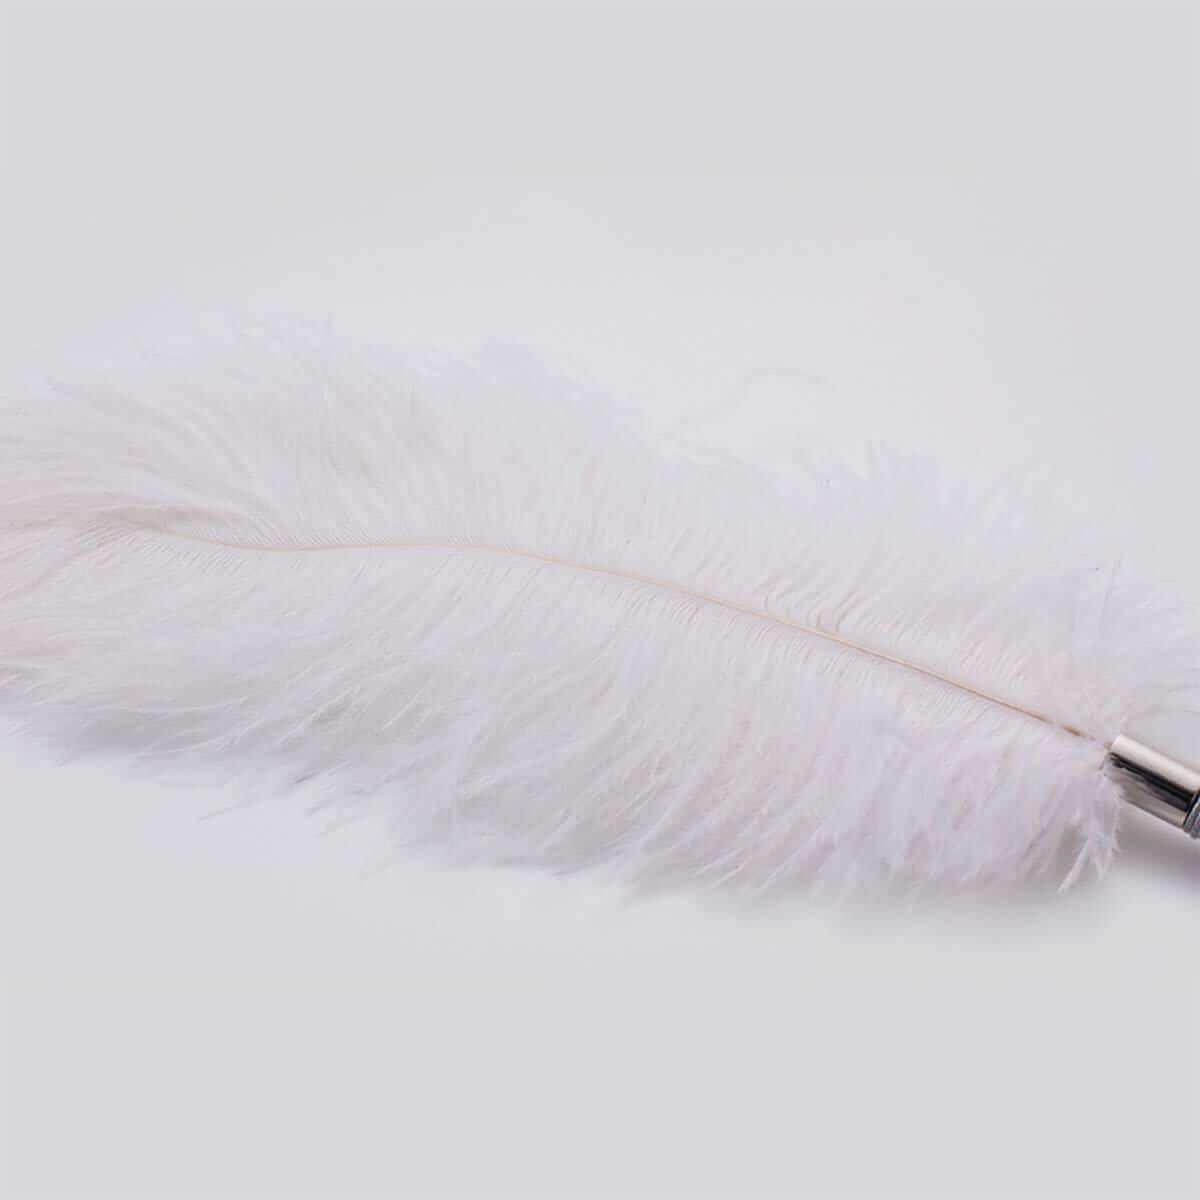 Black or White Luxury Feather Tickler - Thorn & Feather Sex Toy Canada